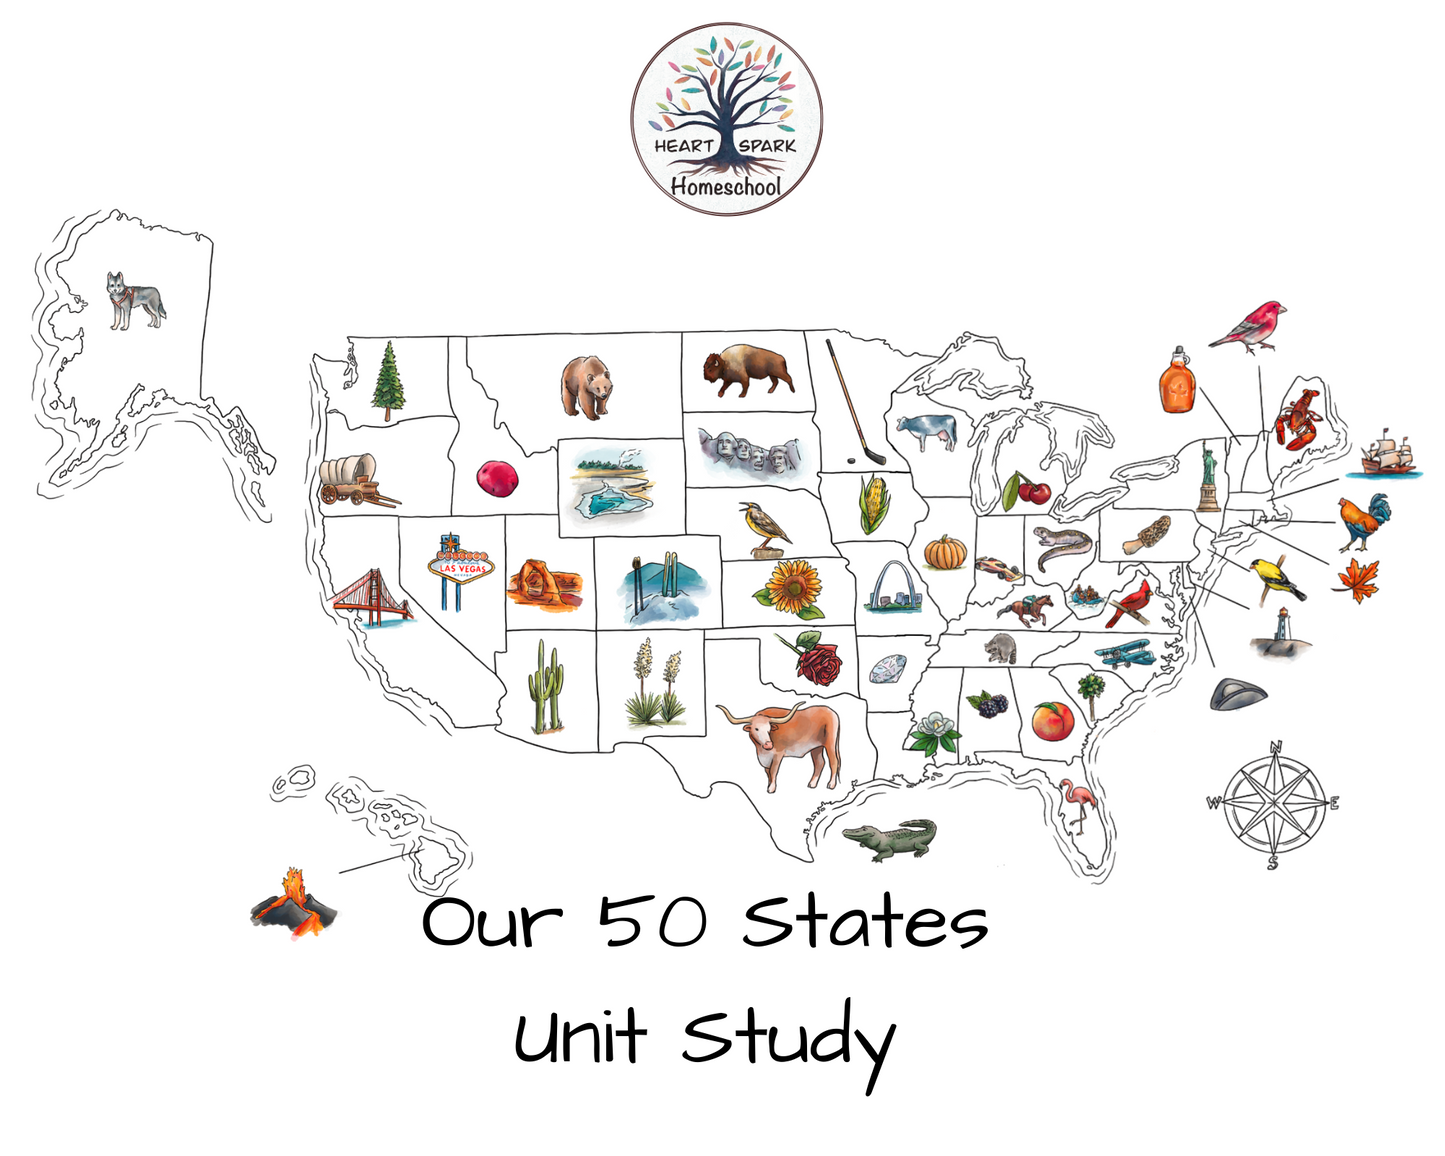 Our 50 States Full Unit Study: SOUTHEAST